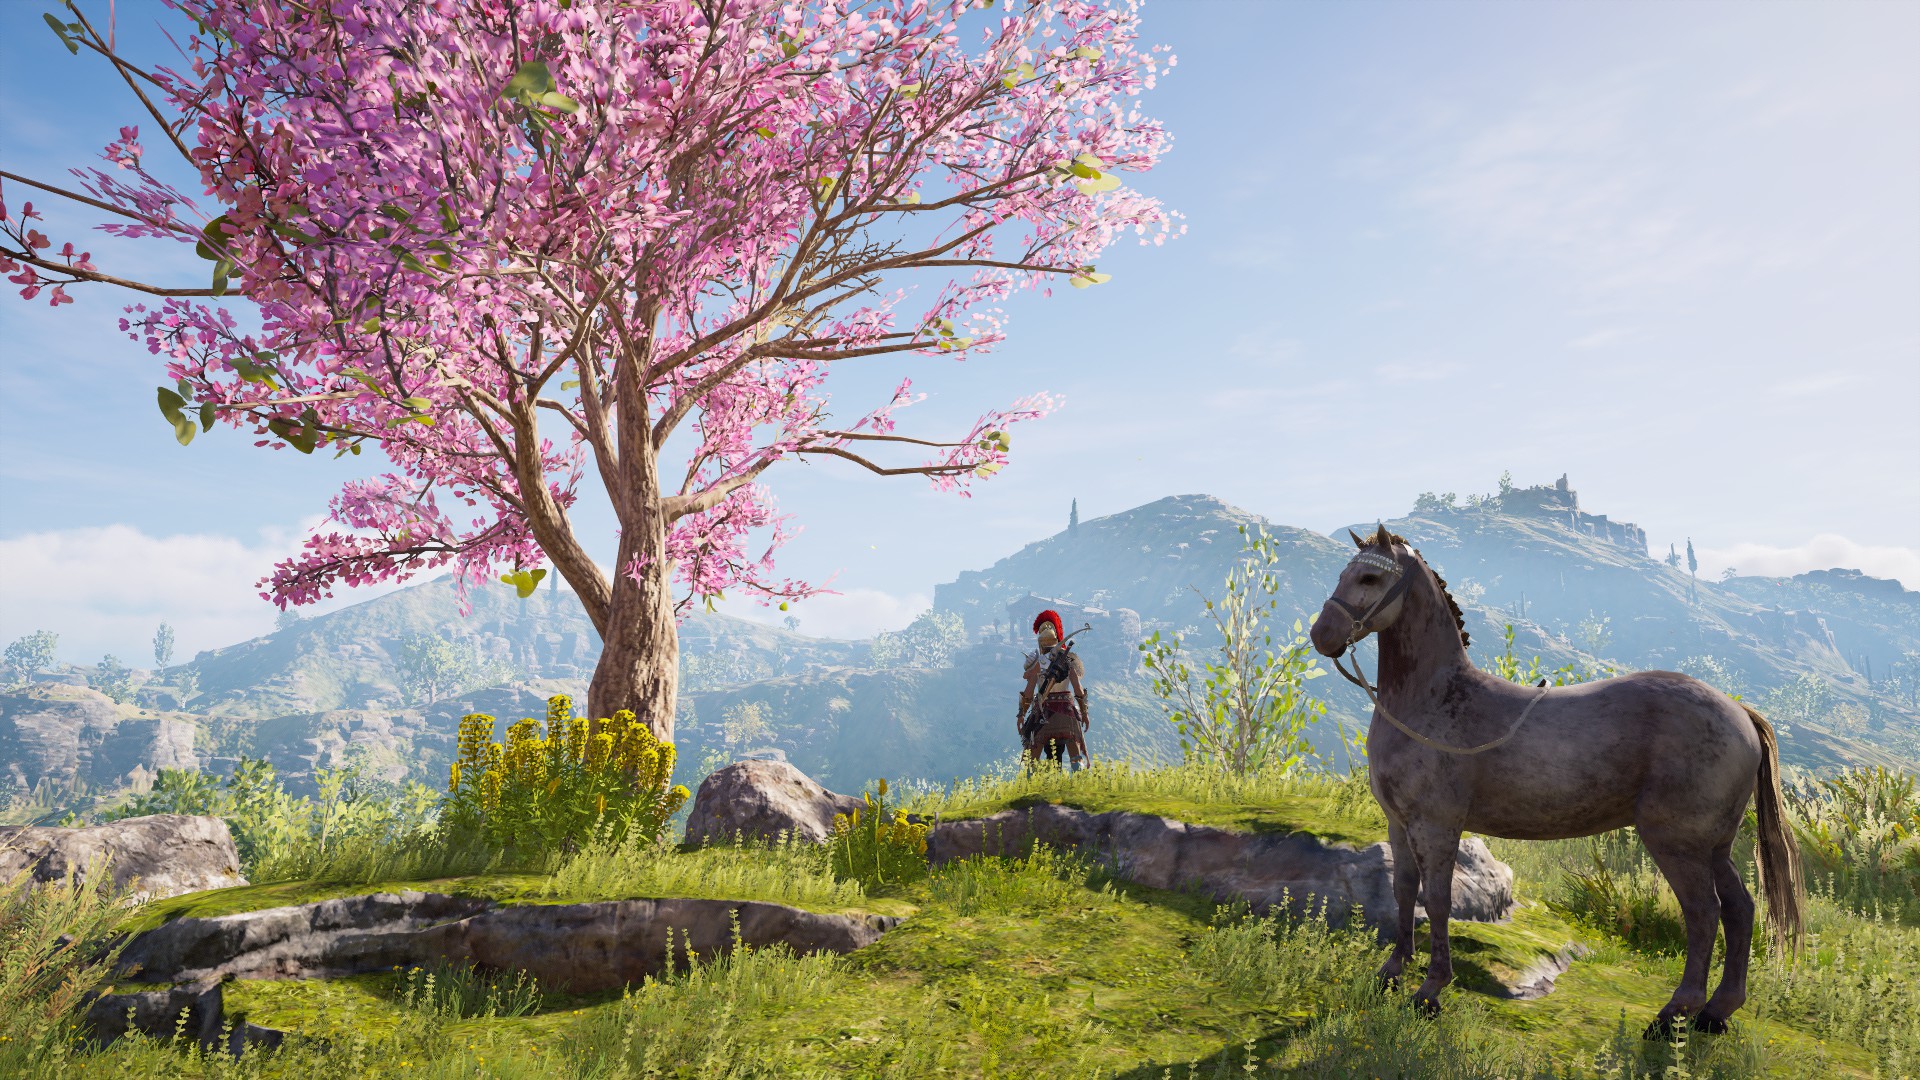 Assassin Creed Odyssey Assassins Creed Video Games PC Gaming Horse Video Game Landscape Screen Shot 1920x1080